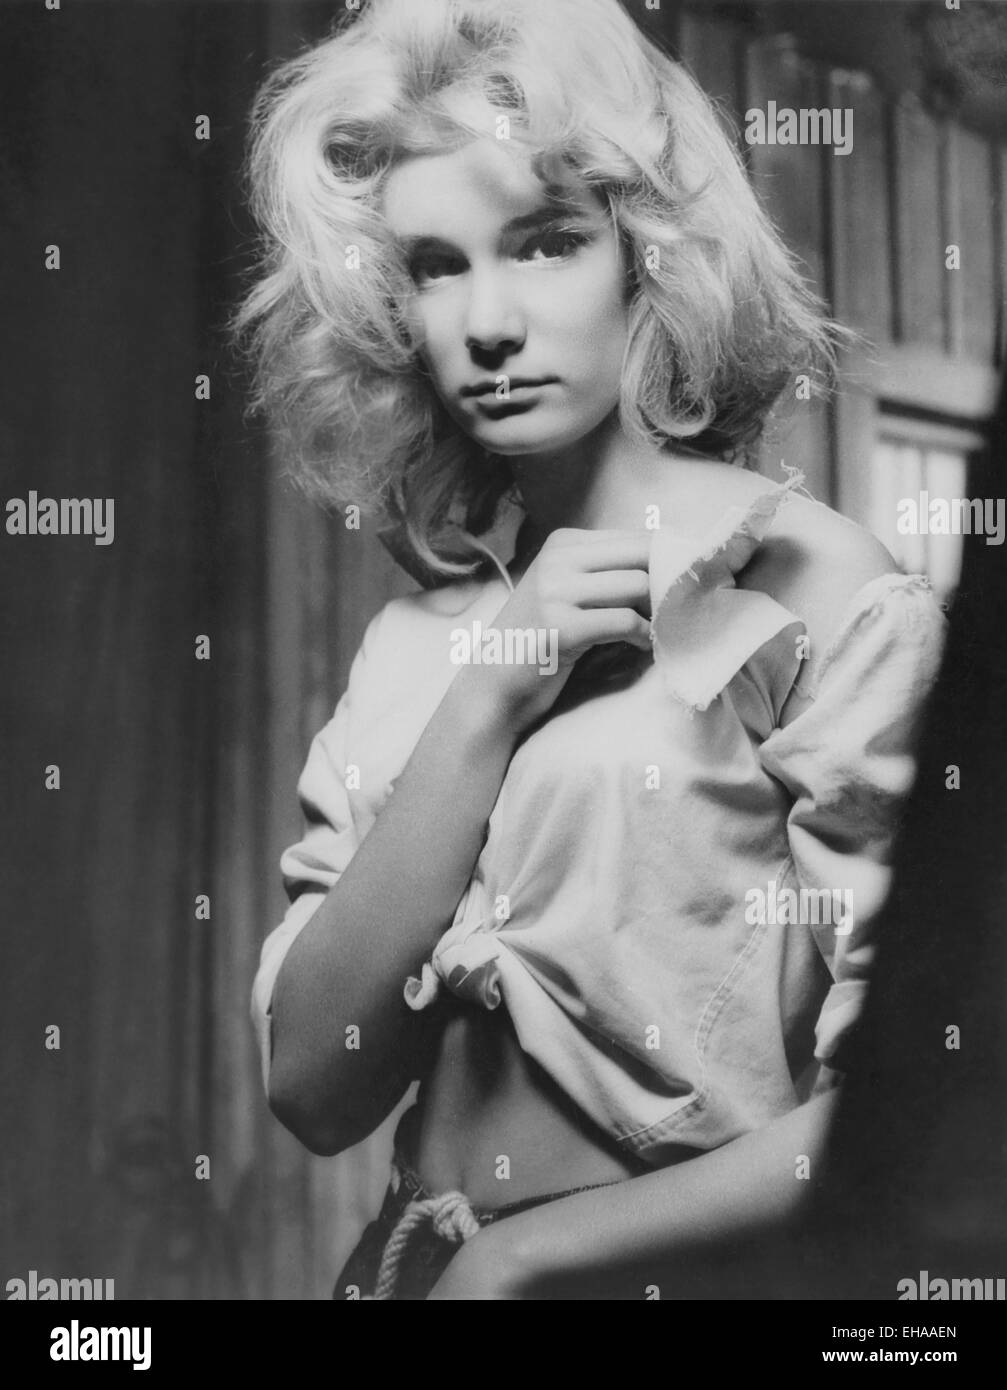 Yvette mimieux topless